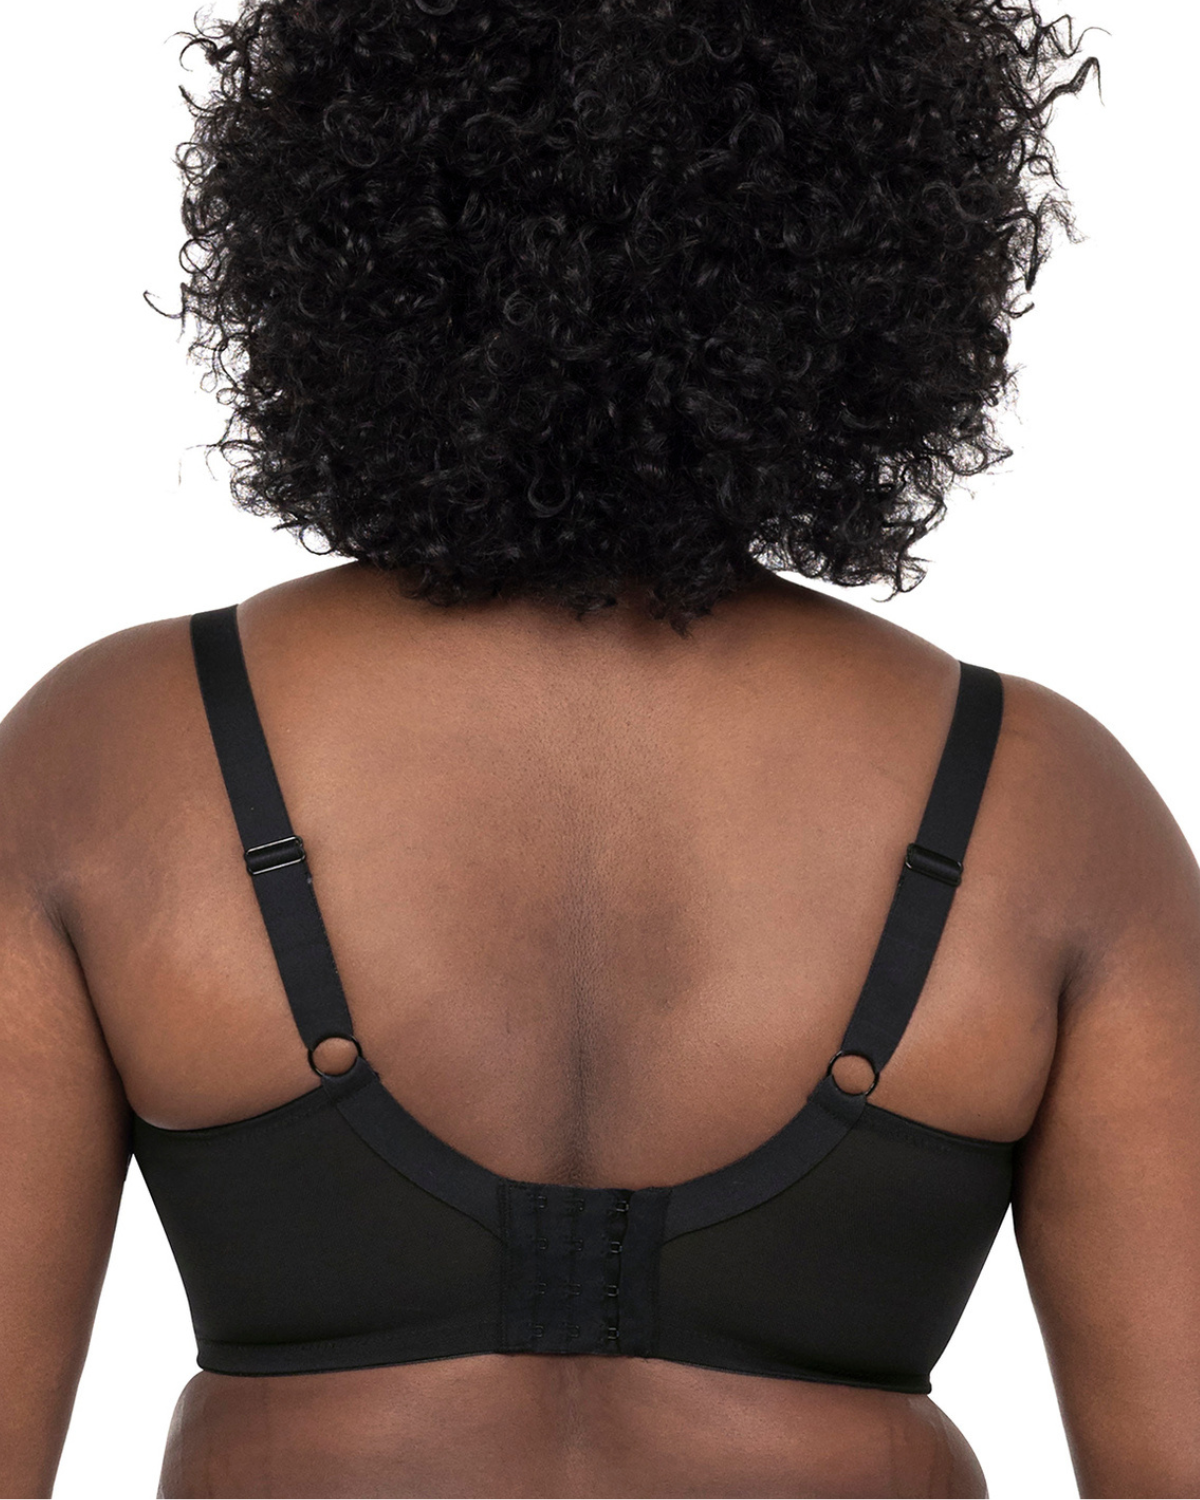 Model wearing a cut and sew full cup banded underwire bra in black